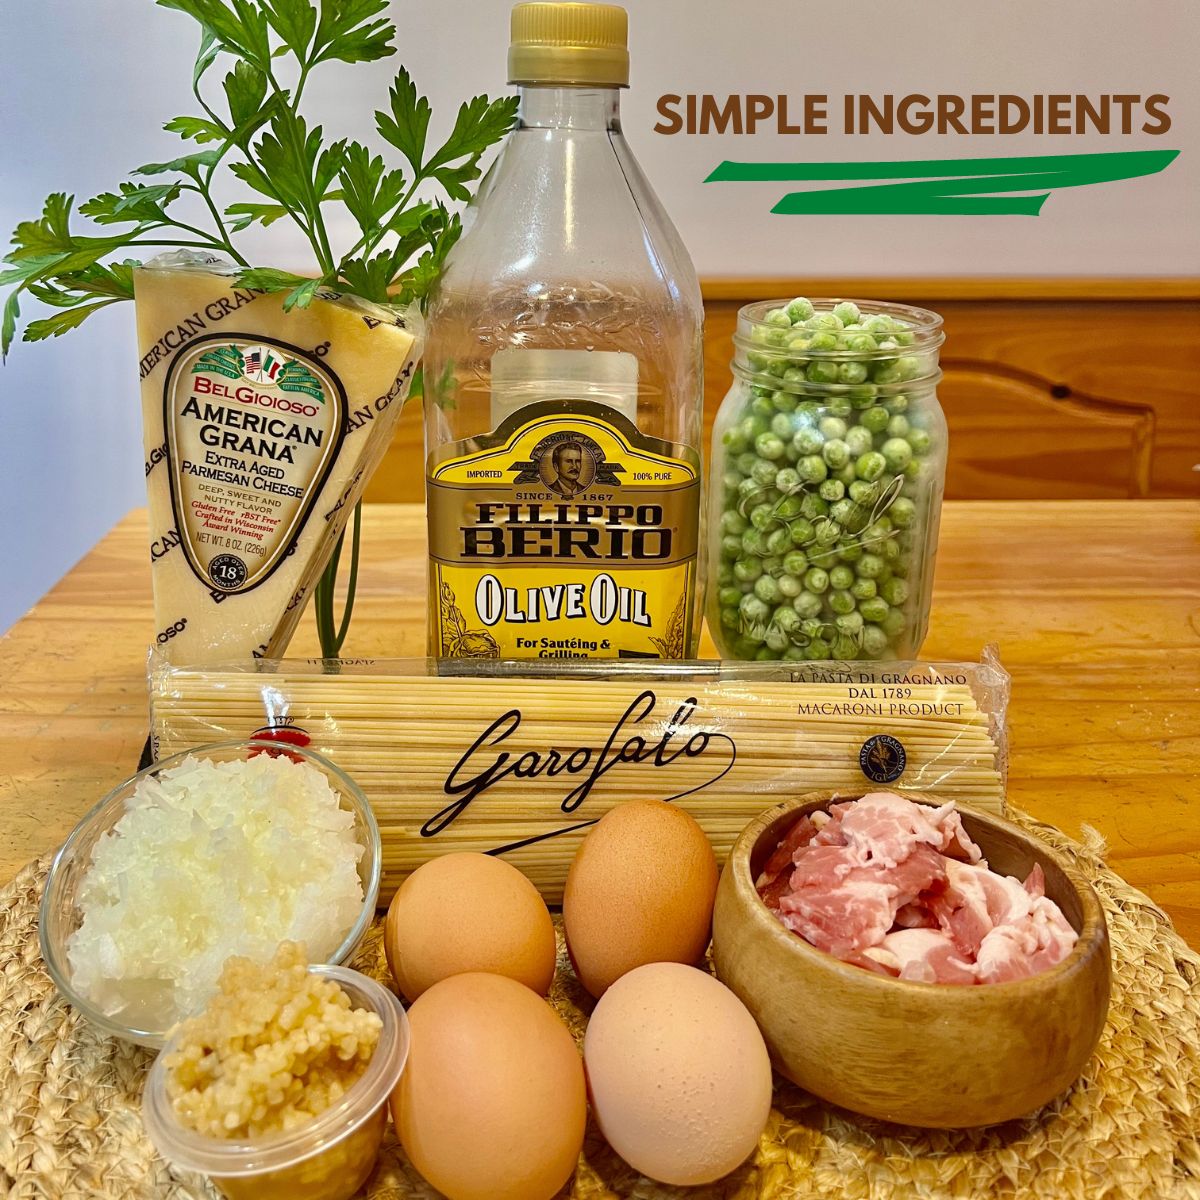 pasta carbonara ingredients on a wooden table parmesan cheese, olive oil, peas,onion,eggs and bacon